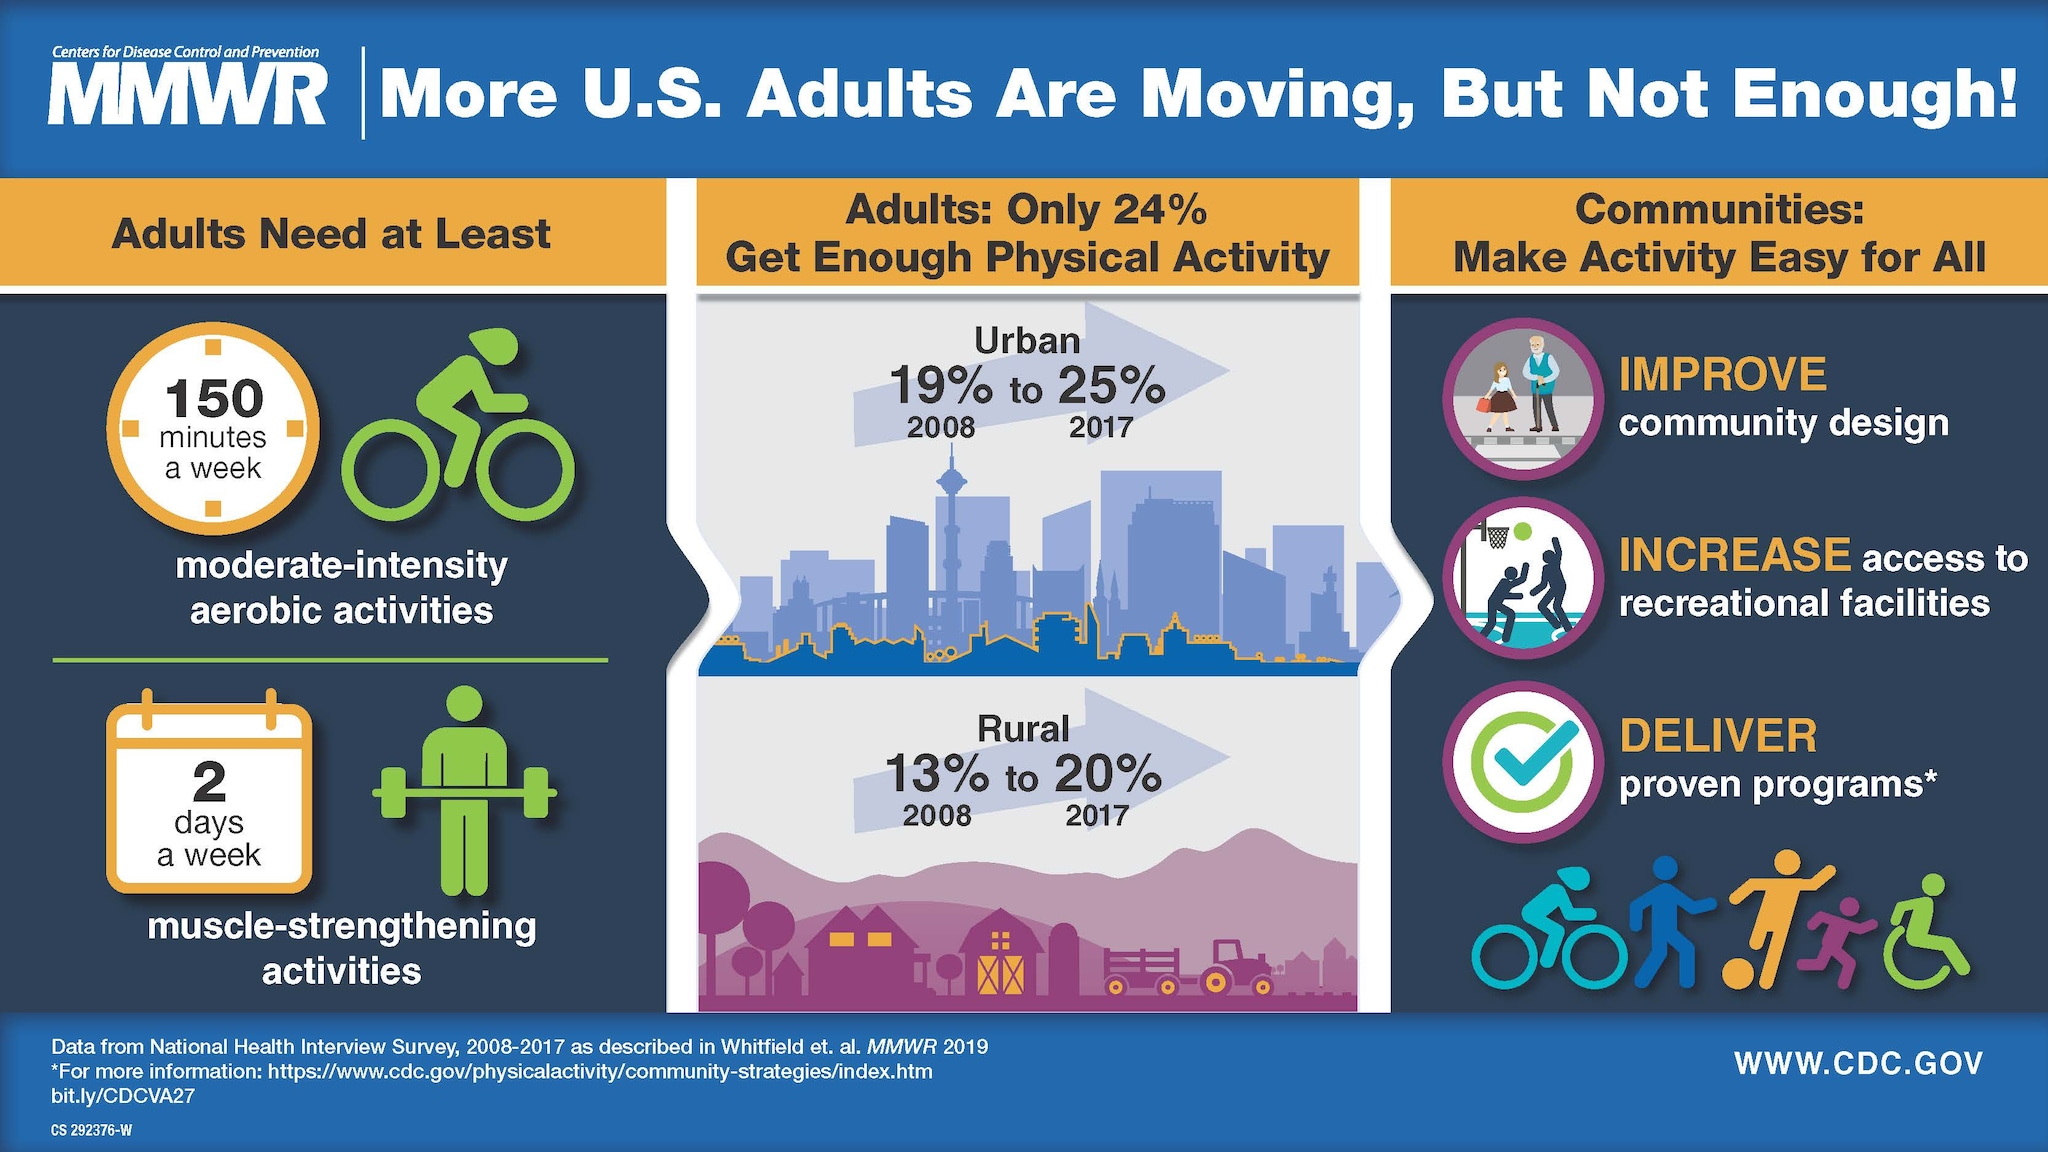 The figure is a Visual Abstract on adult physical activity; it urges communities to make activity easy for all.